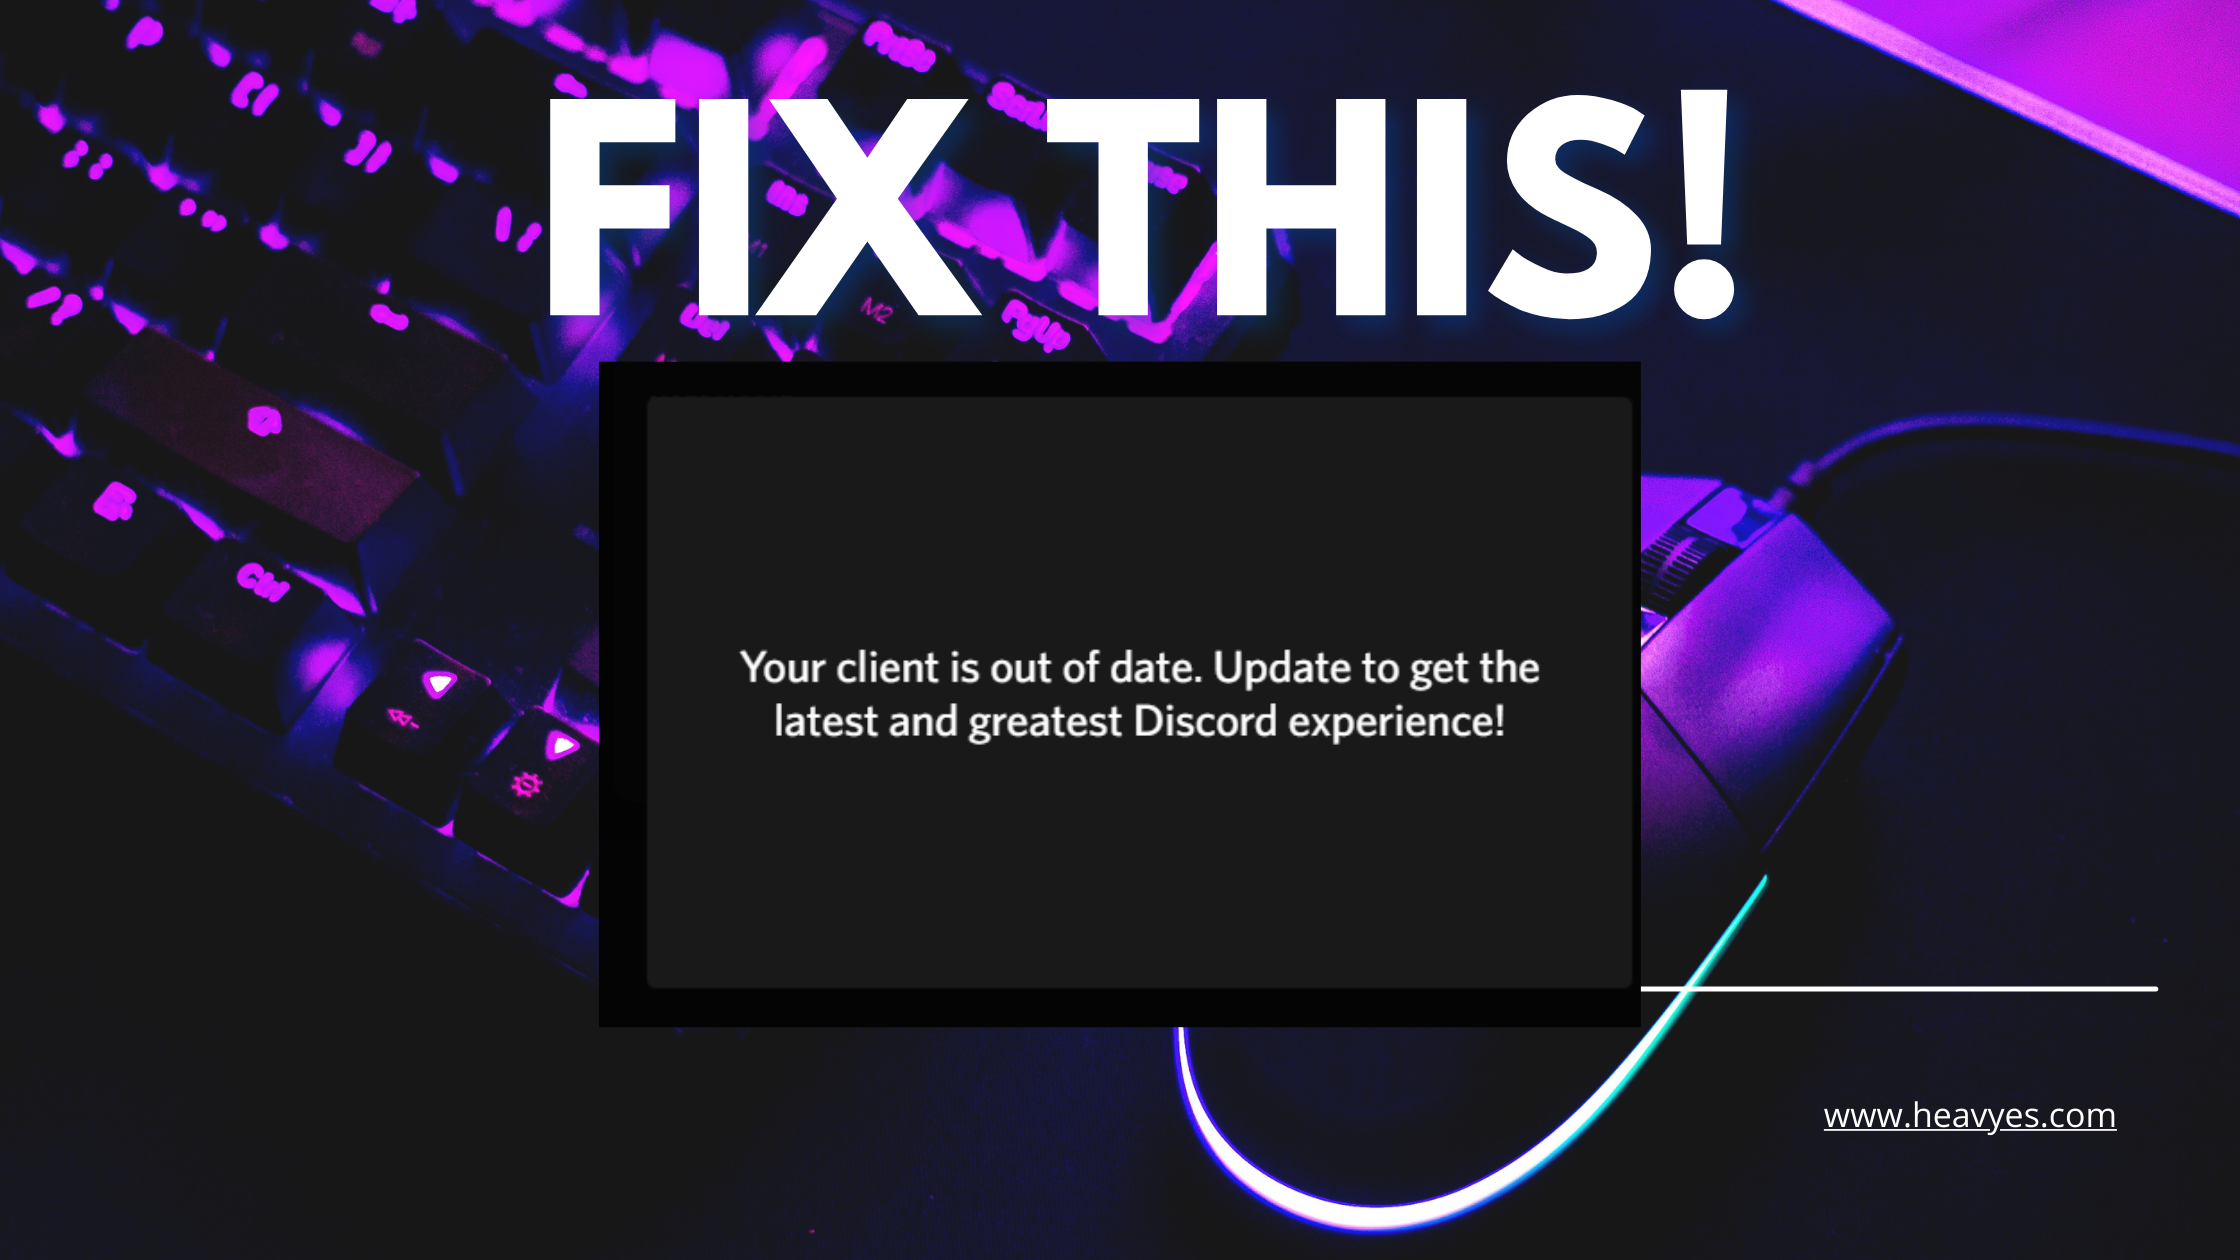 How To Fix Your Client Is Out Of Date On Discord